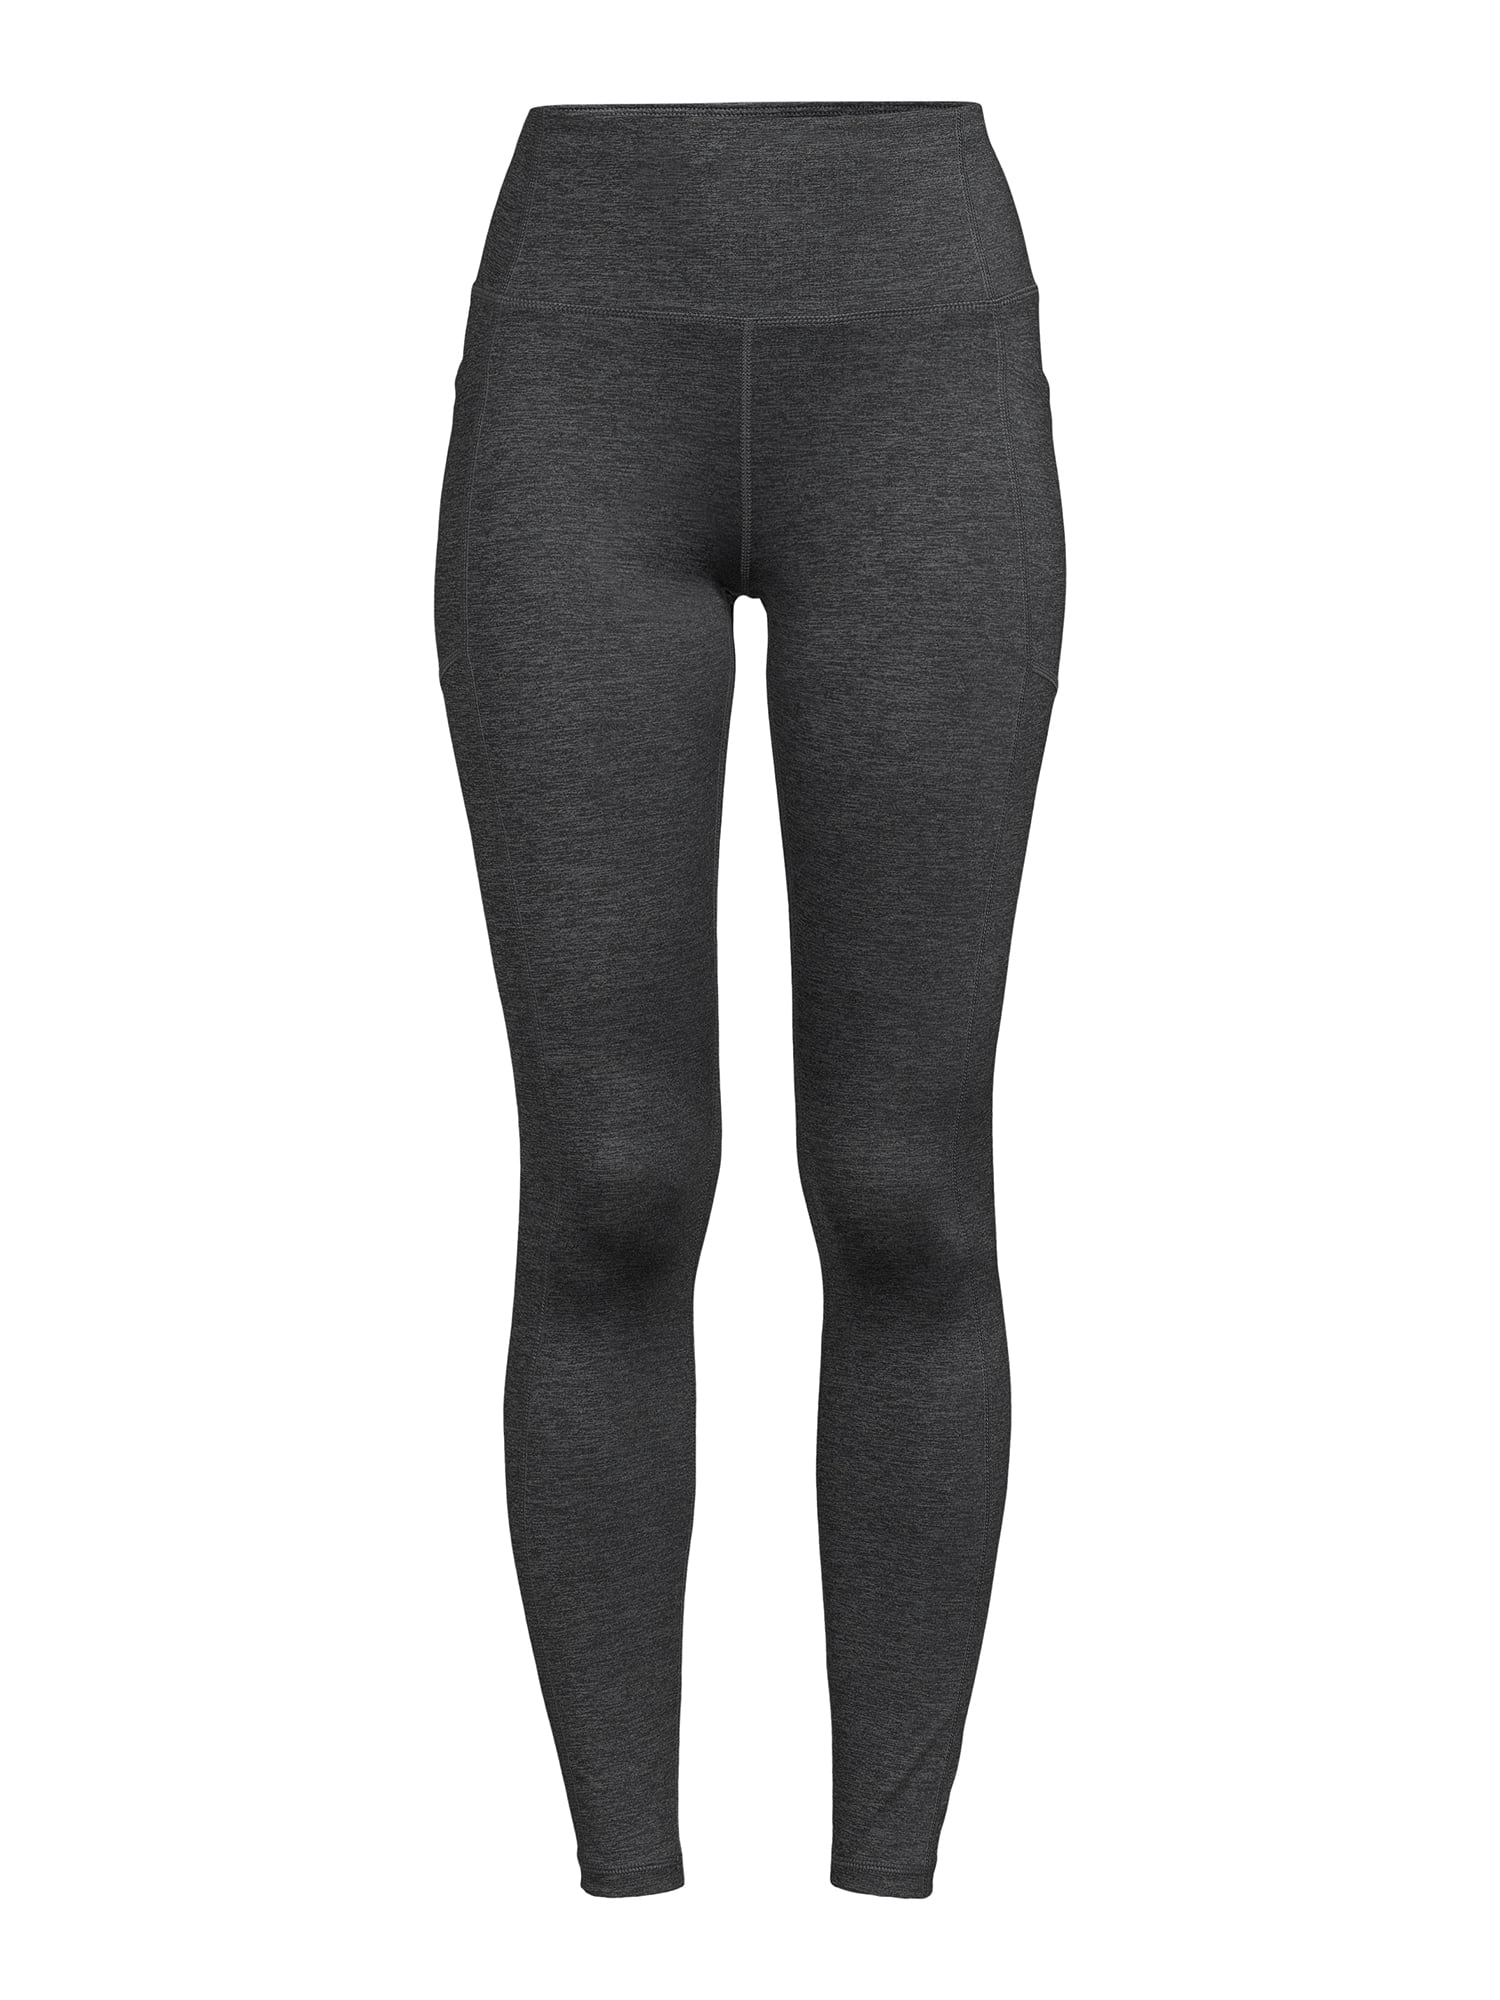 Buy Avia Activewear Women's High Waist Ankle Tights with Side